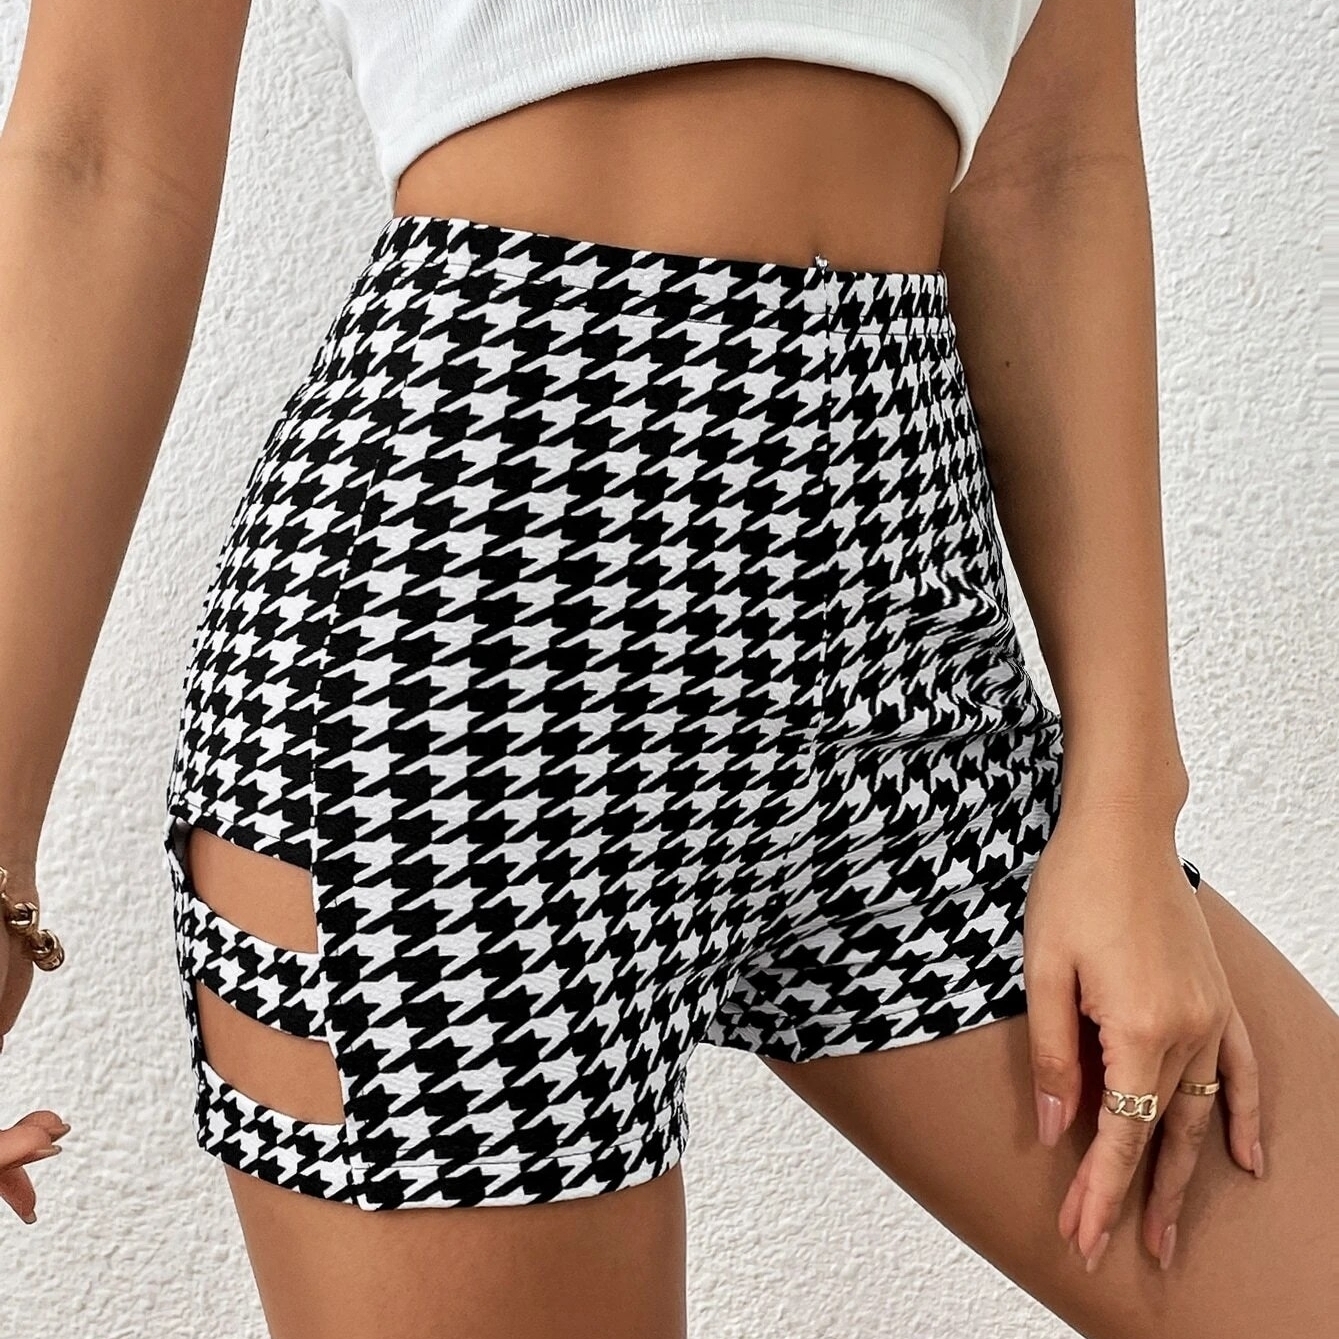 Houndstooth Print Cut Out Side Shorts - L